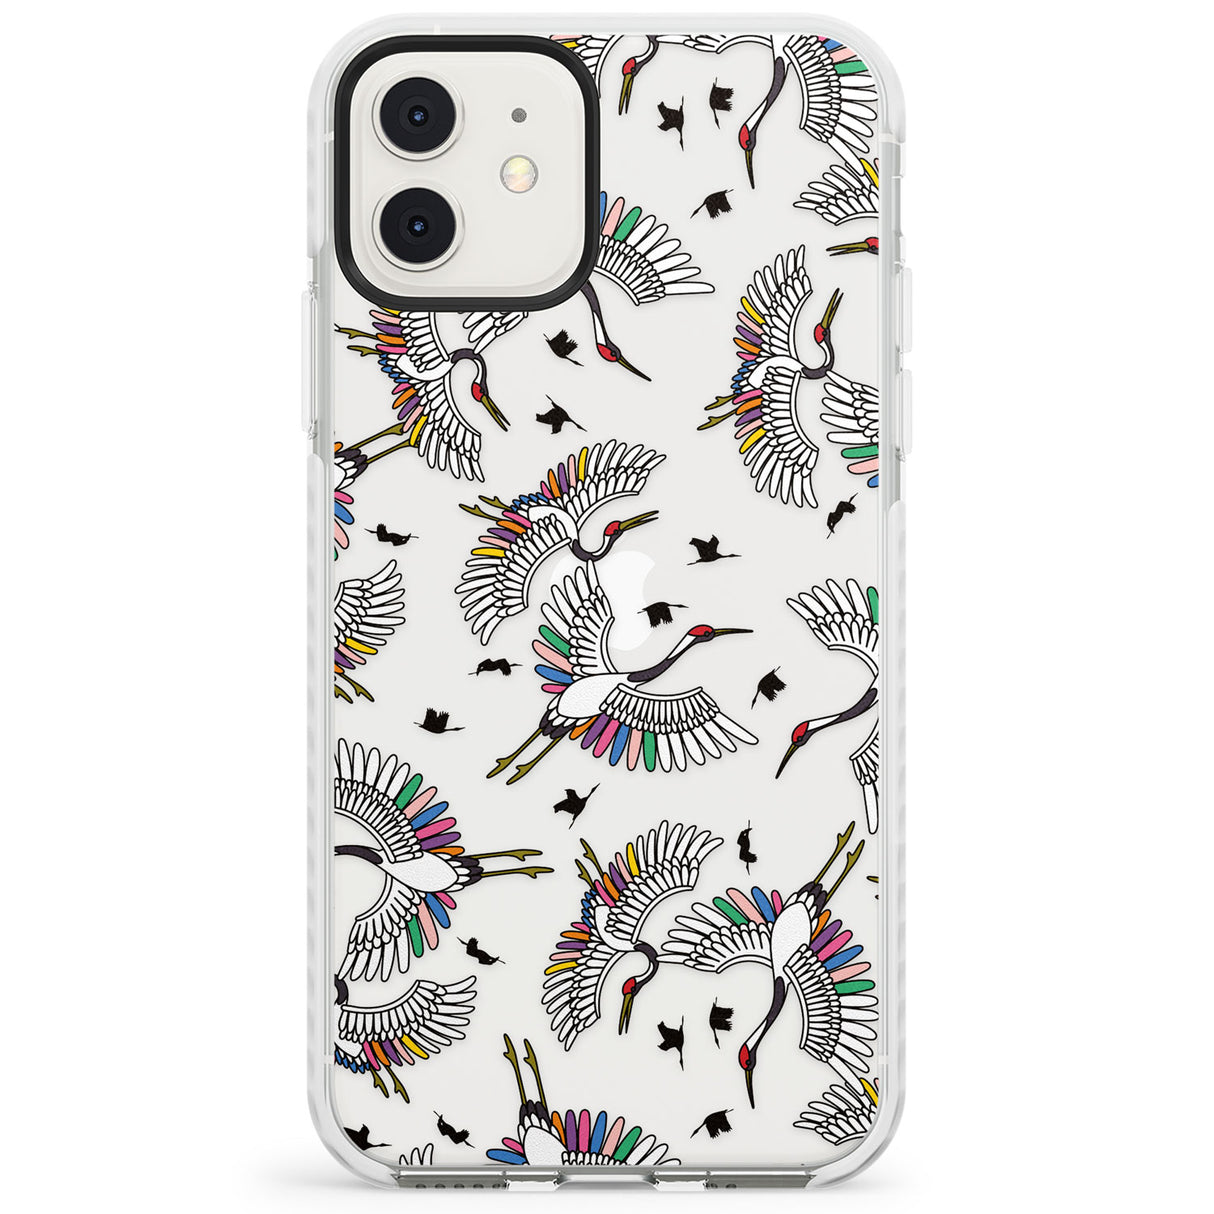 Colourful Crane Pattern Impact Phone Case for iPhone 11, iphone 12